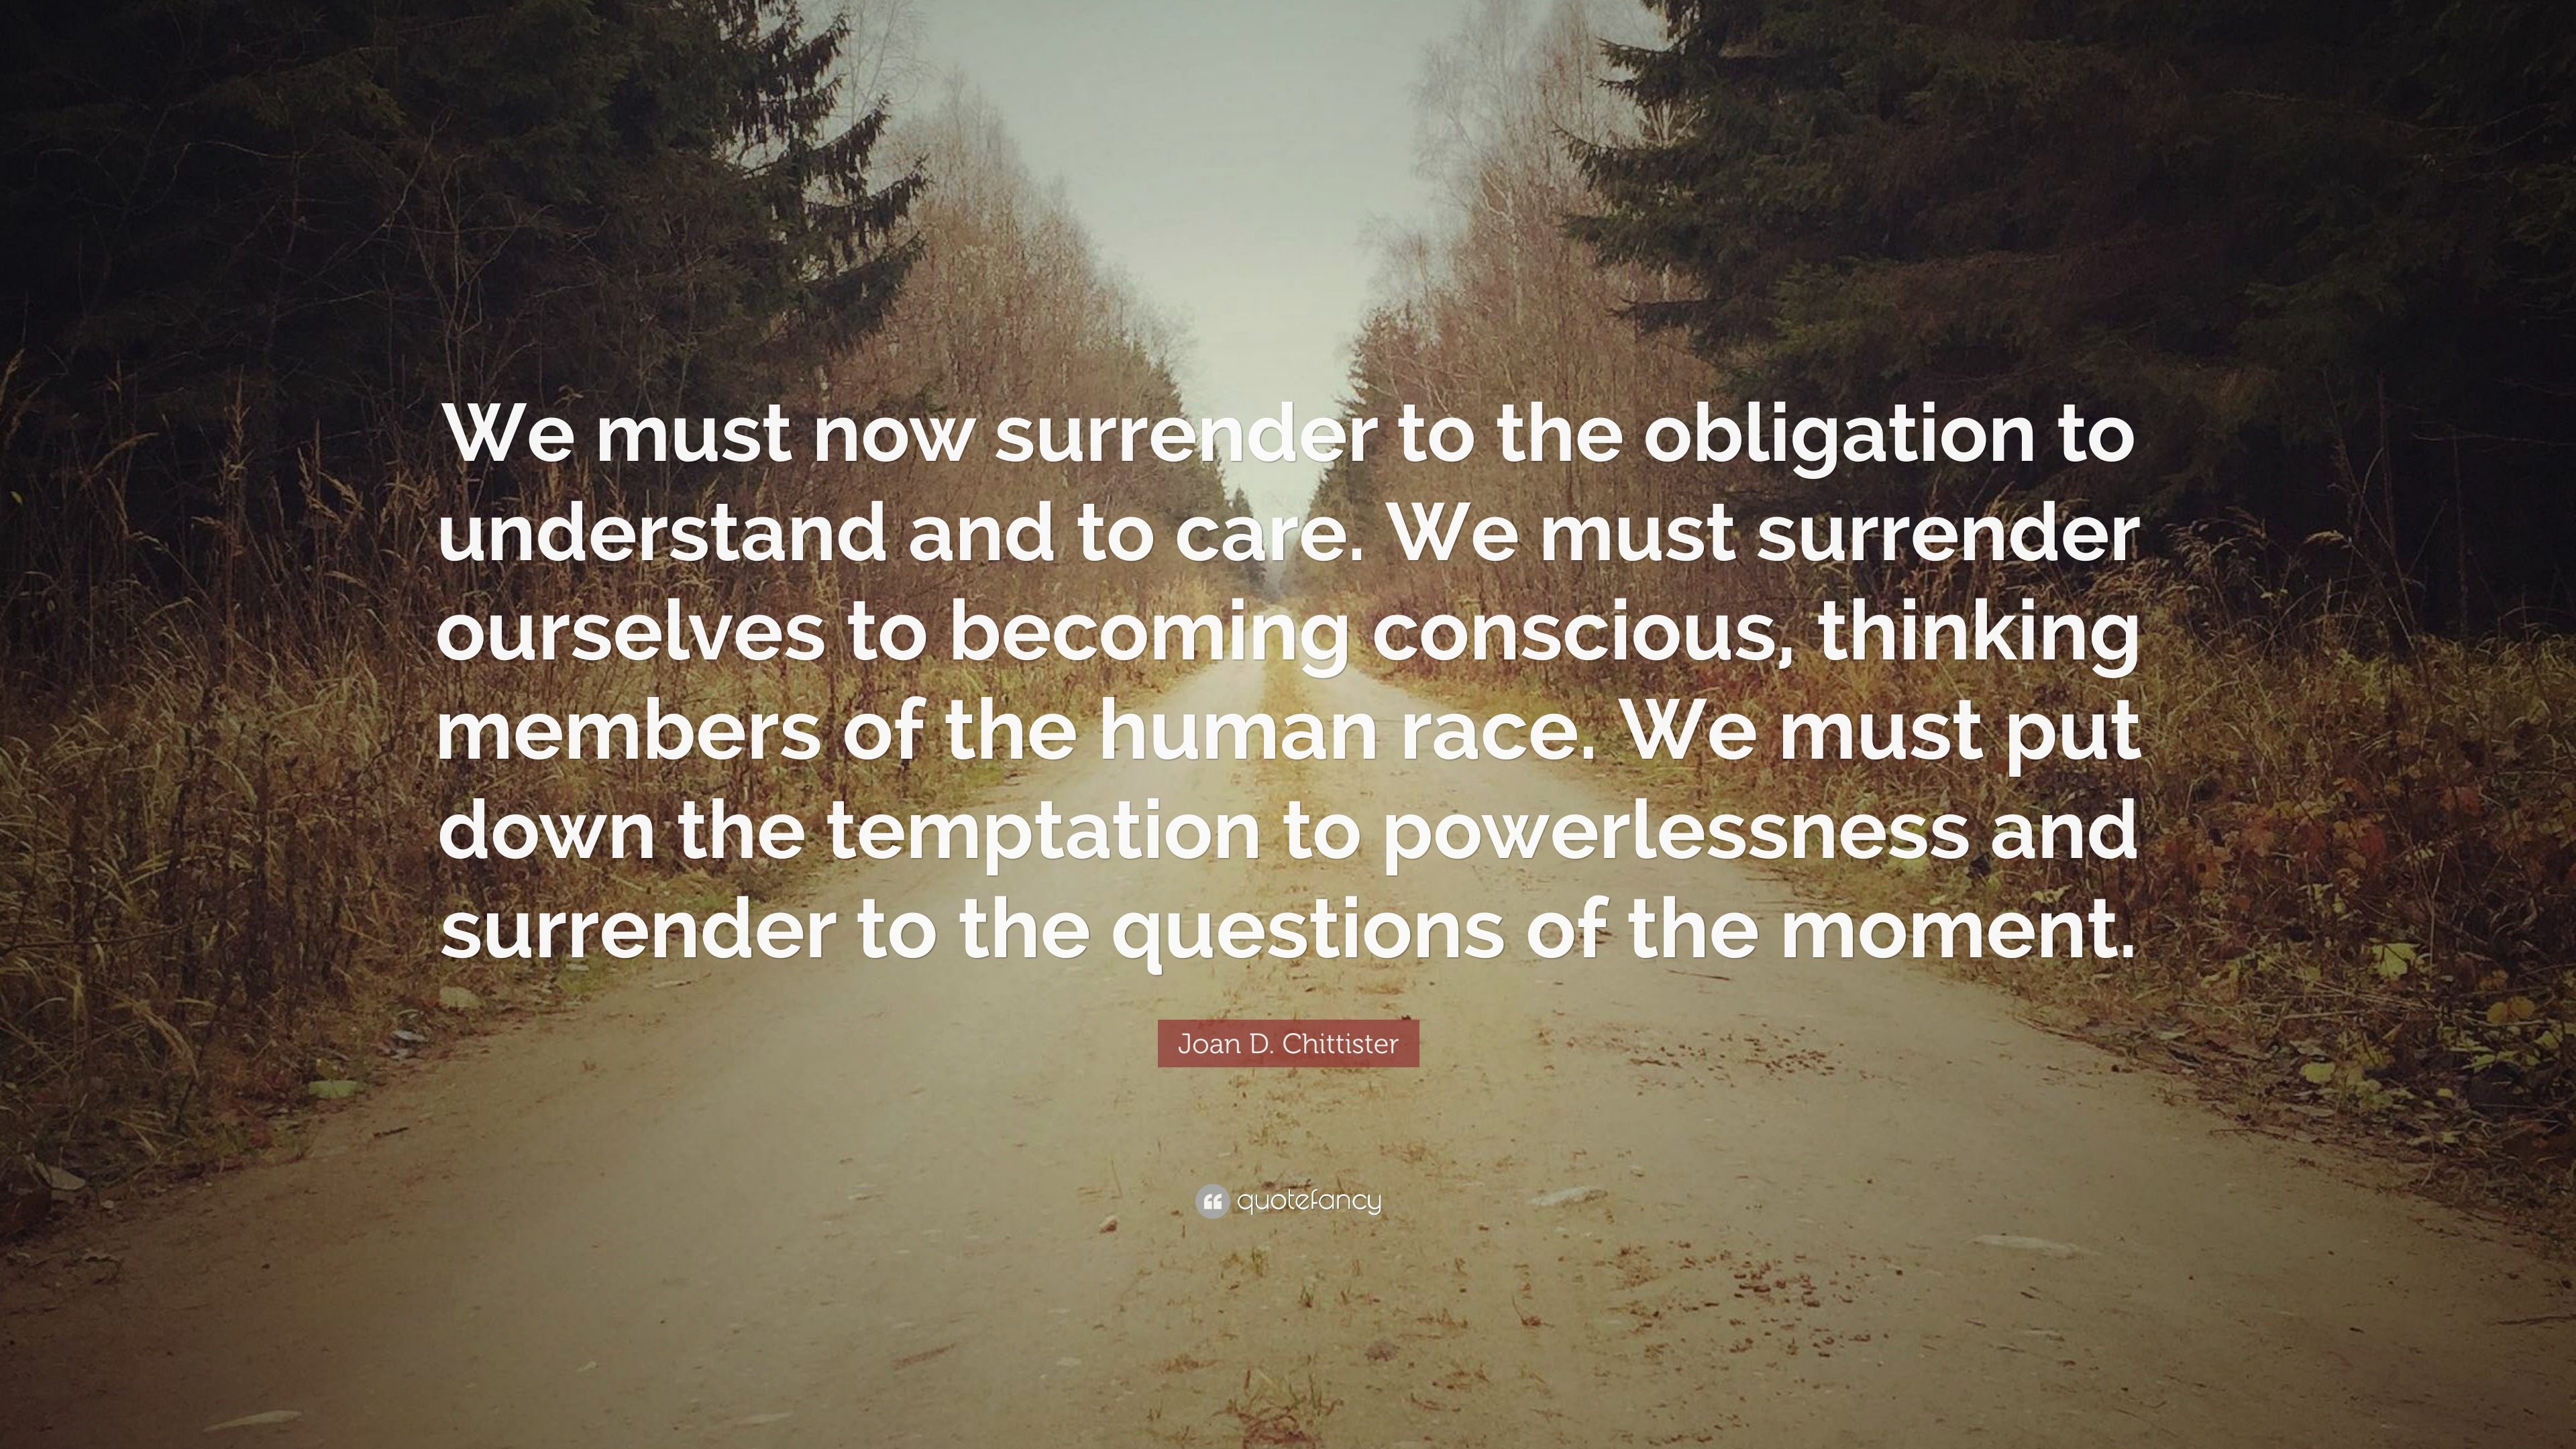 Joan D. Chittister Quote: “We must now surrender to the obligation